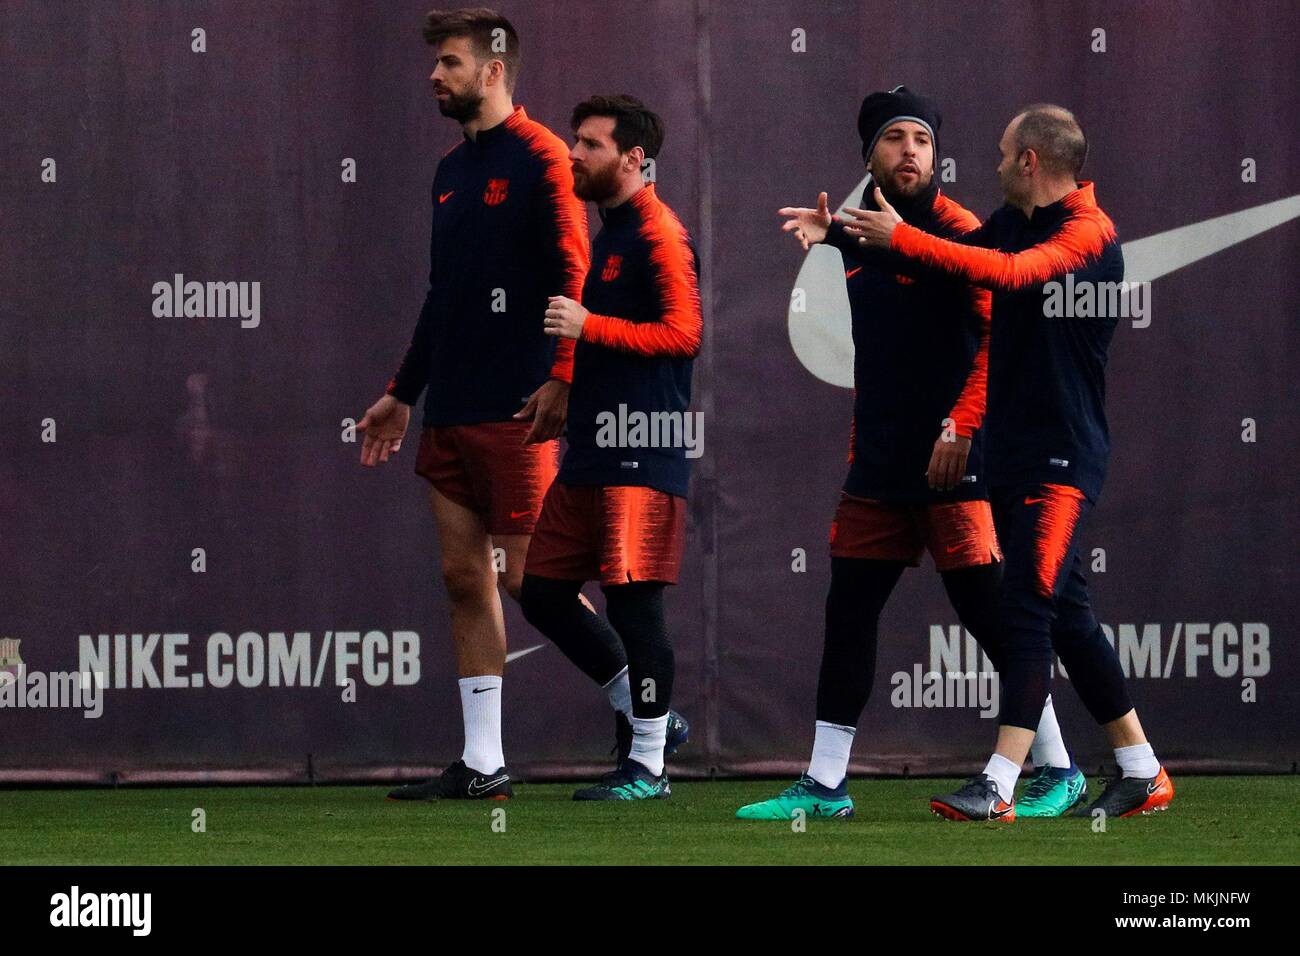 FC Barcelona's players Gerard Pique (L), Leo Messi (2L), Jordi Alba (2R)  and Andres Iniesta (R) participate in a training session of the team at the  Camp Nou stadium in Sant Joan